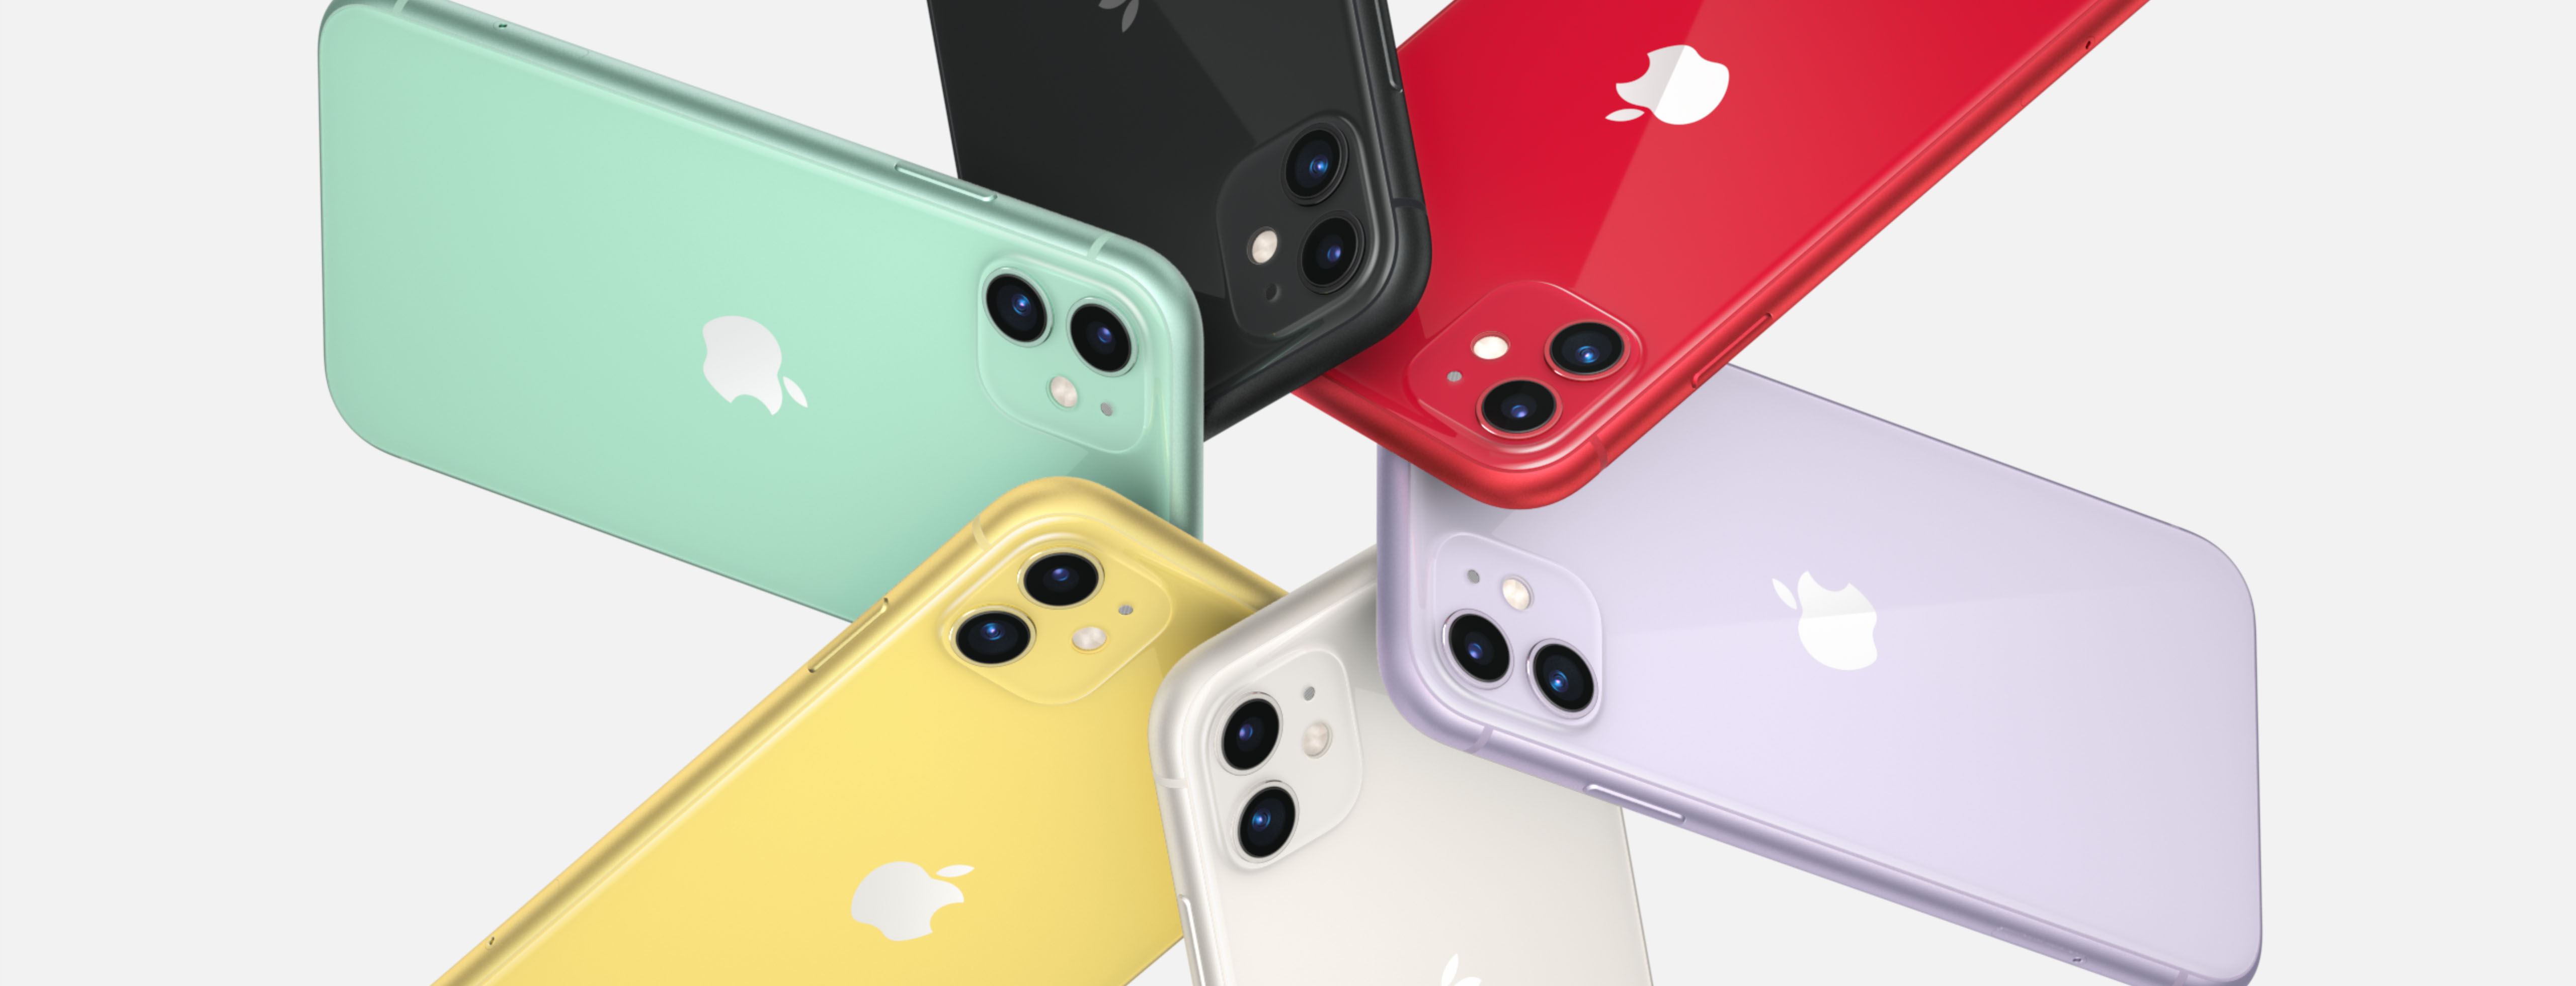 ölmek Parana Nehri tehdit  iPhone 11 Pro, iPhone Pro Max yes iPhone 11 - Sales prices and  specifications - How-To